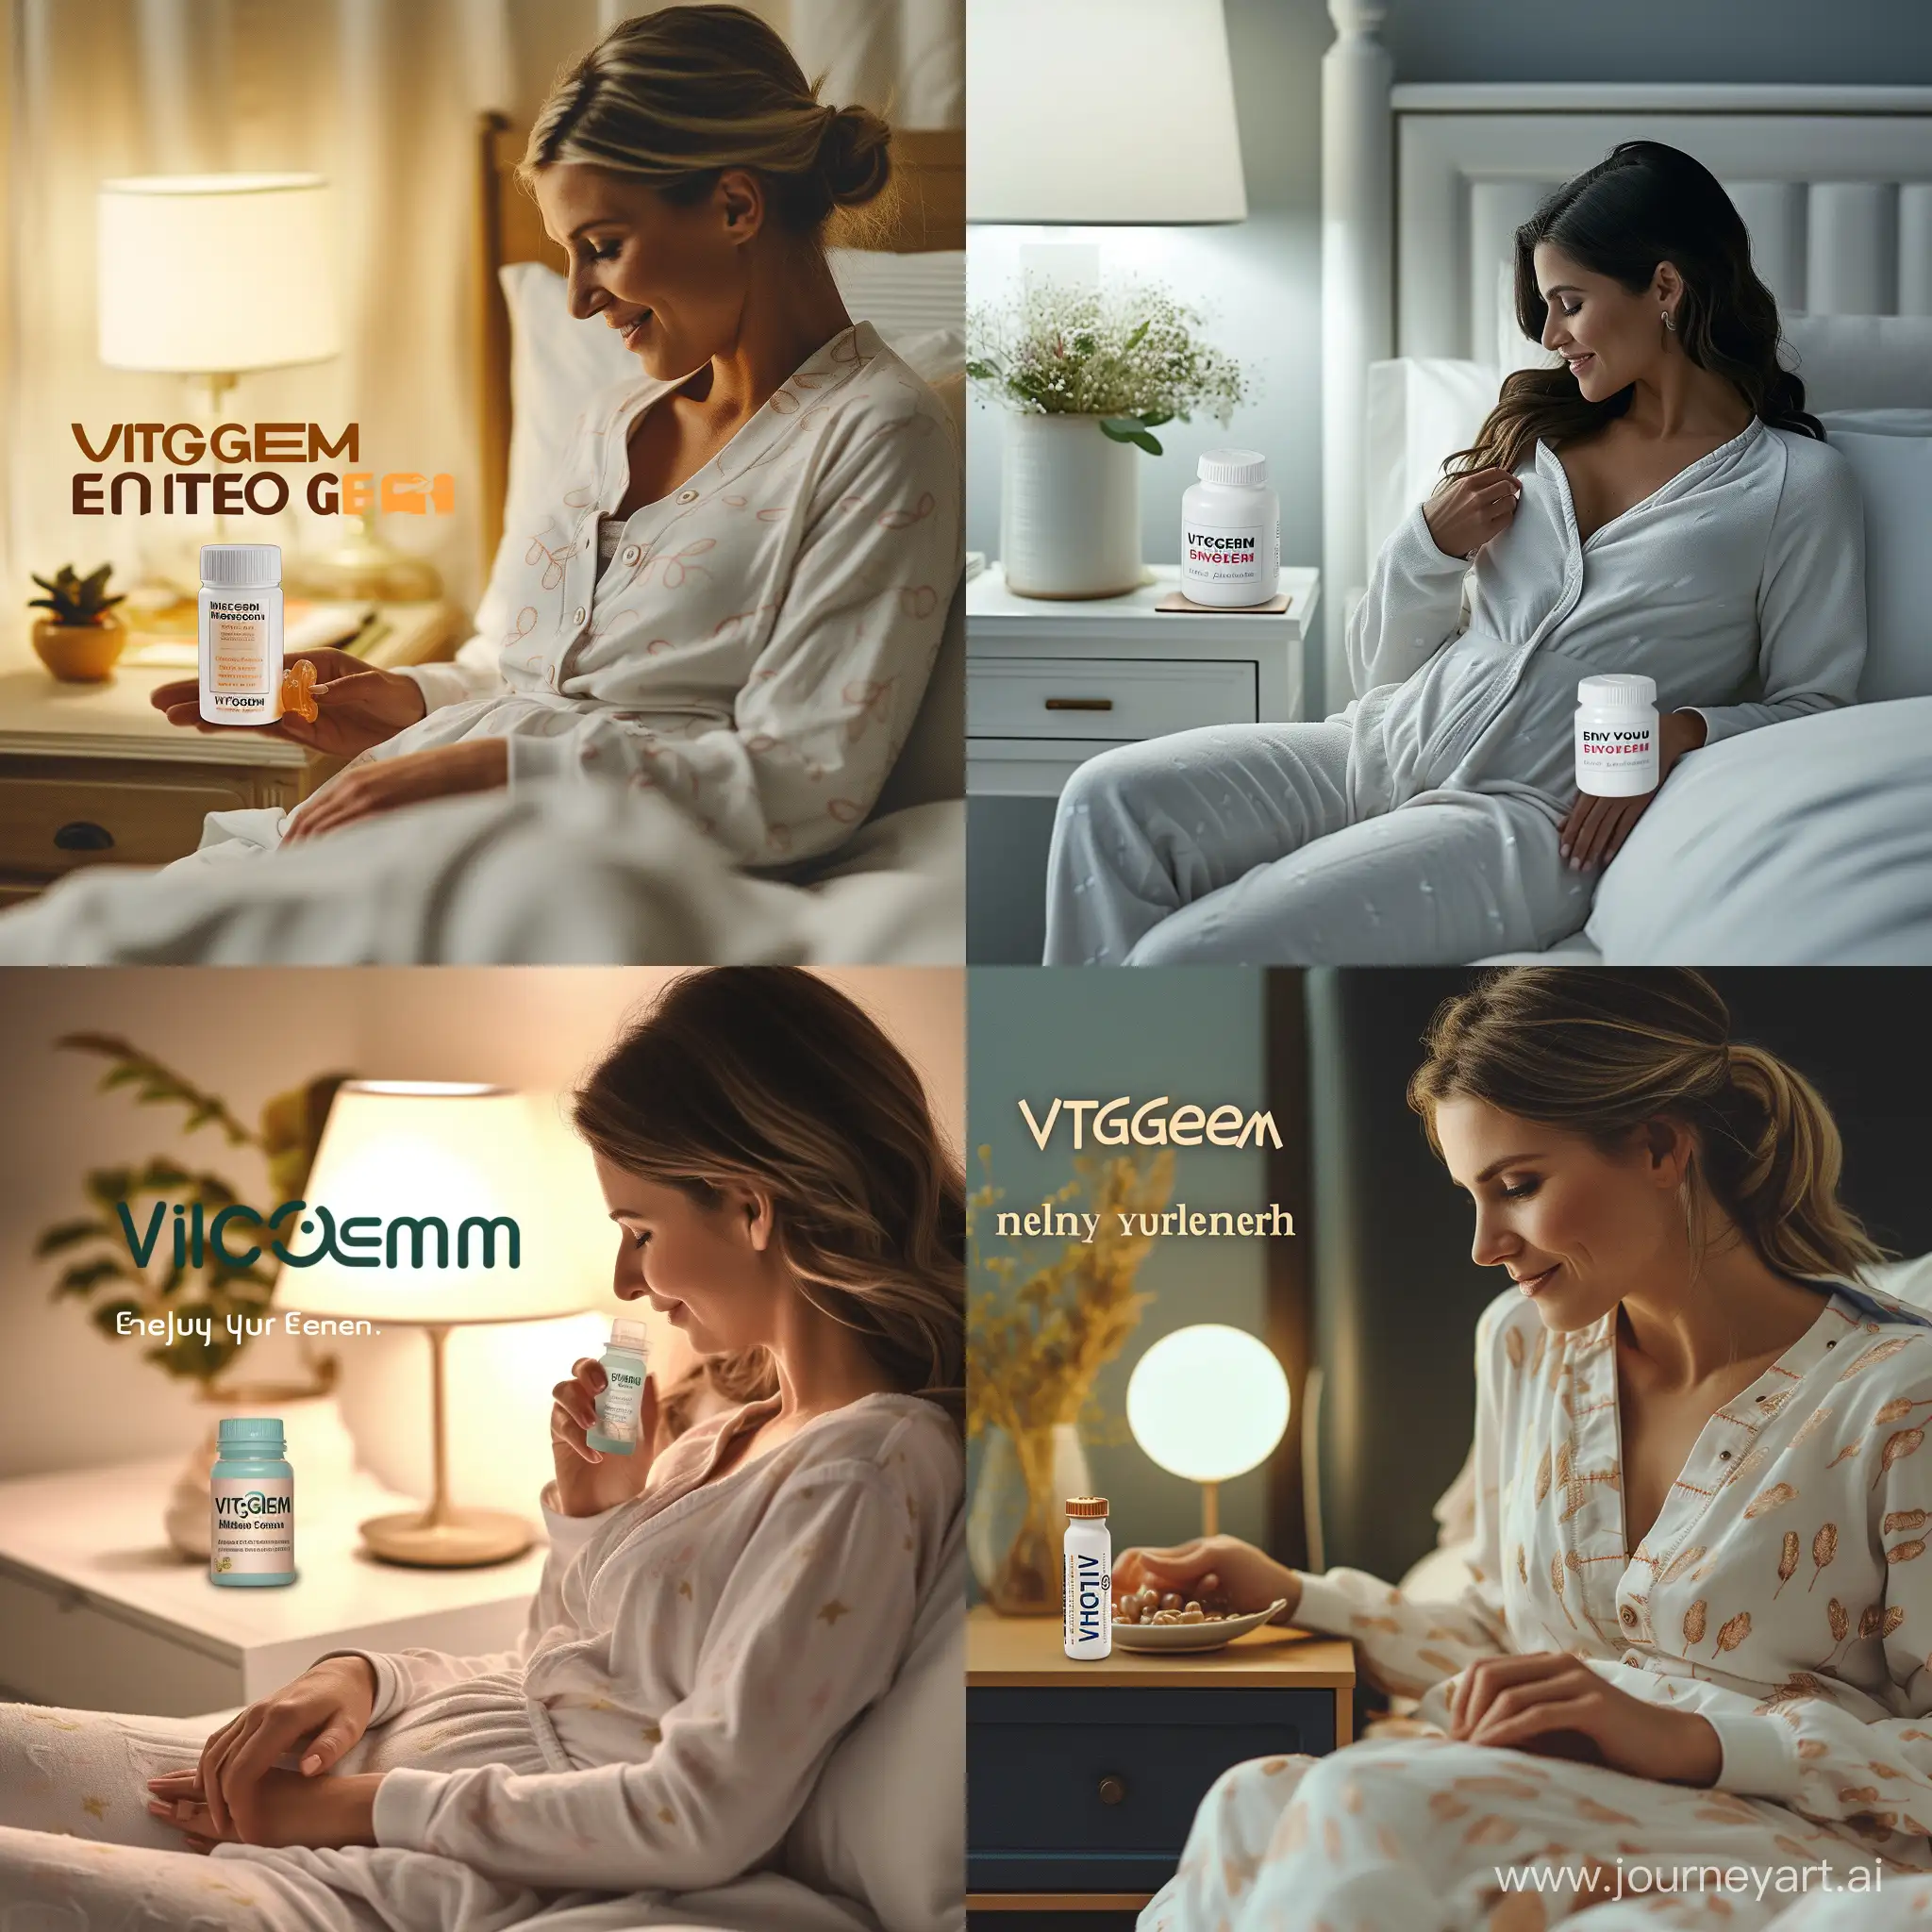 Create an image illustrating a serene evening routine. Picture a buetiful woman in comfortable pajamas settling into bed, a bottle of 'VITGEM Melatonin Gummies' resting on a nearby nightstand, hinting at a night of restful sleep. The setting should exude warmth and tranquility, inviting relaxation. Overlay the scene with the gentle reminder to 'Enjoy Your Evening' 